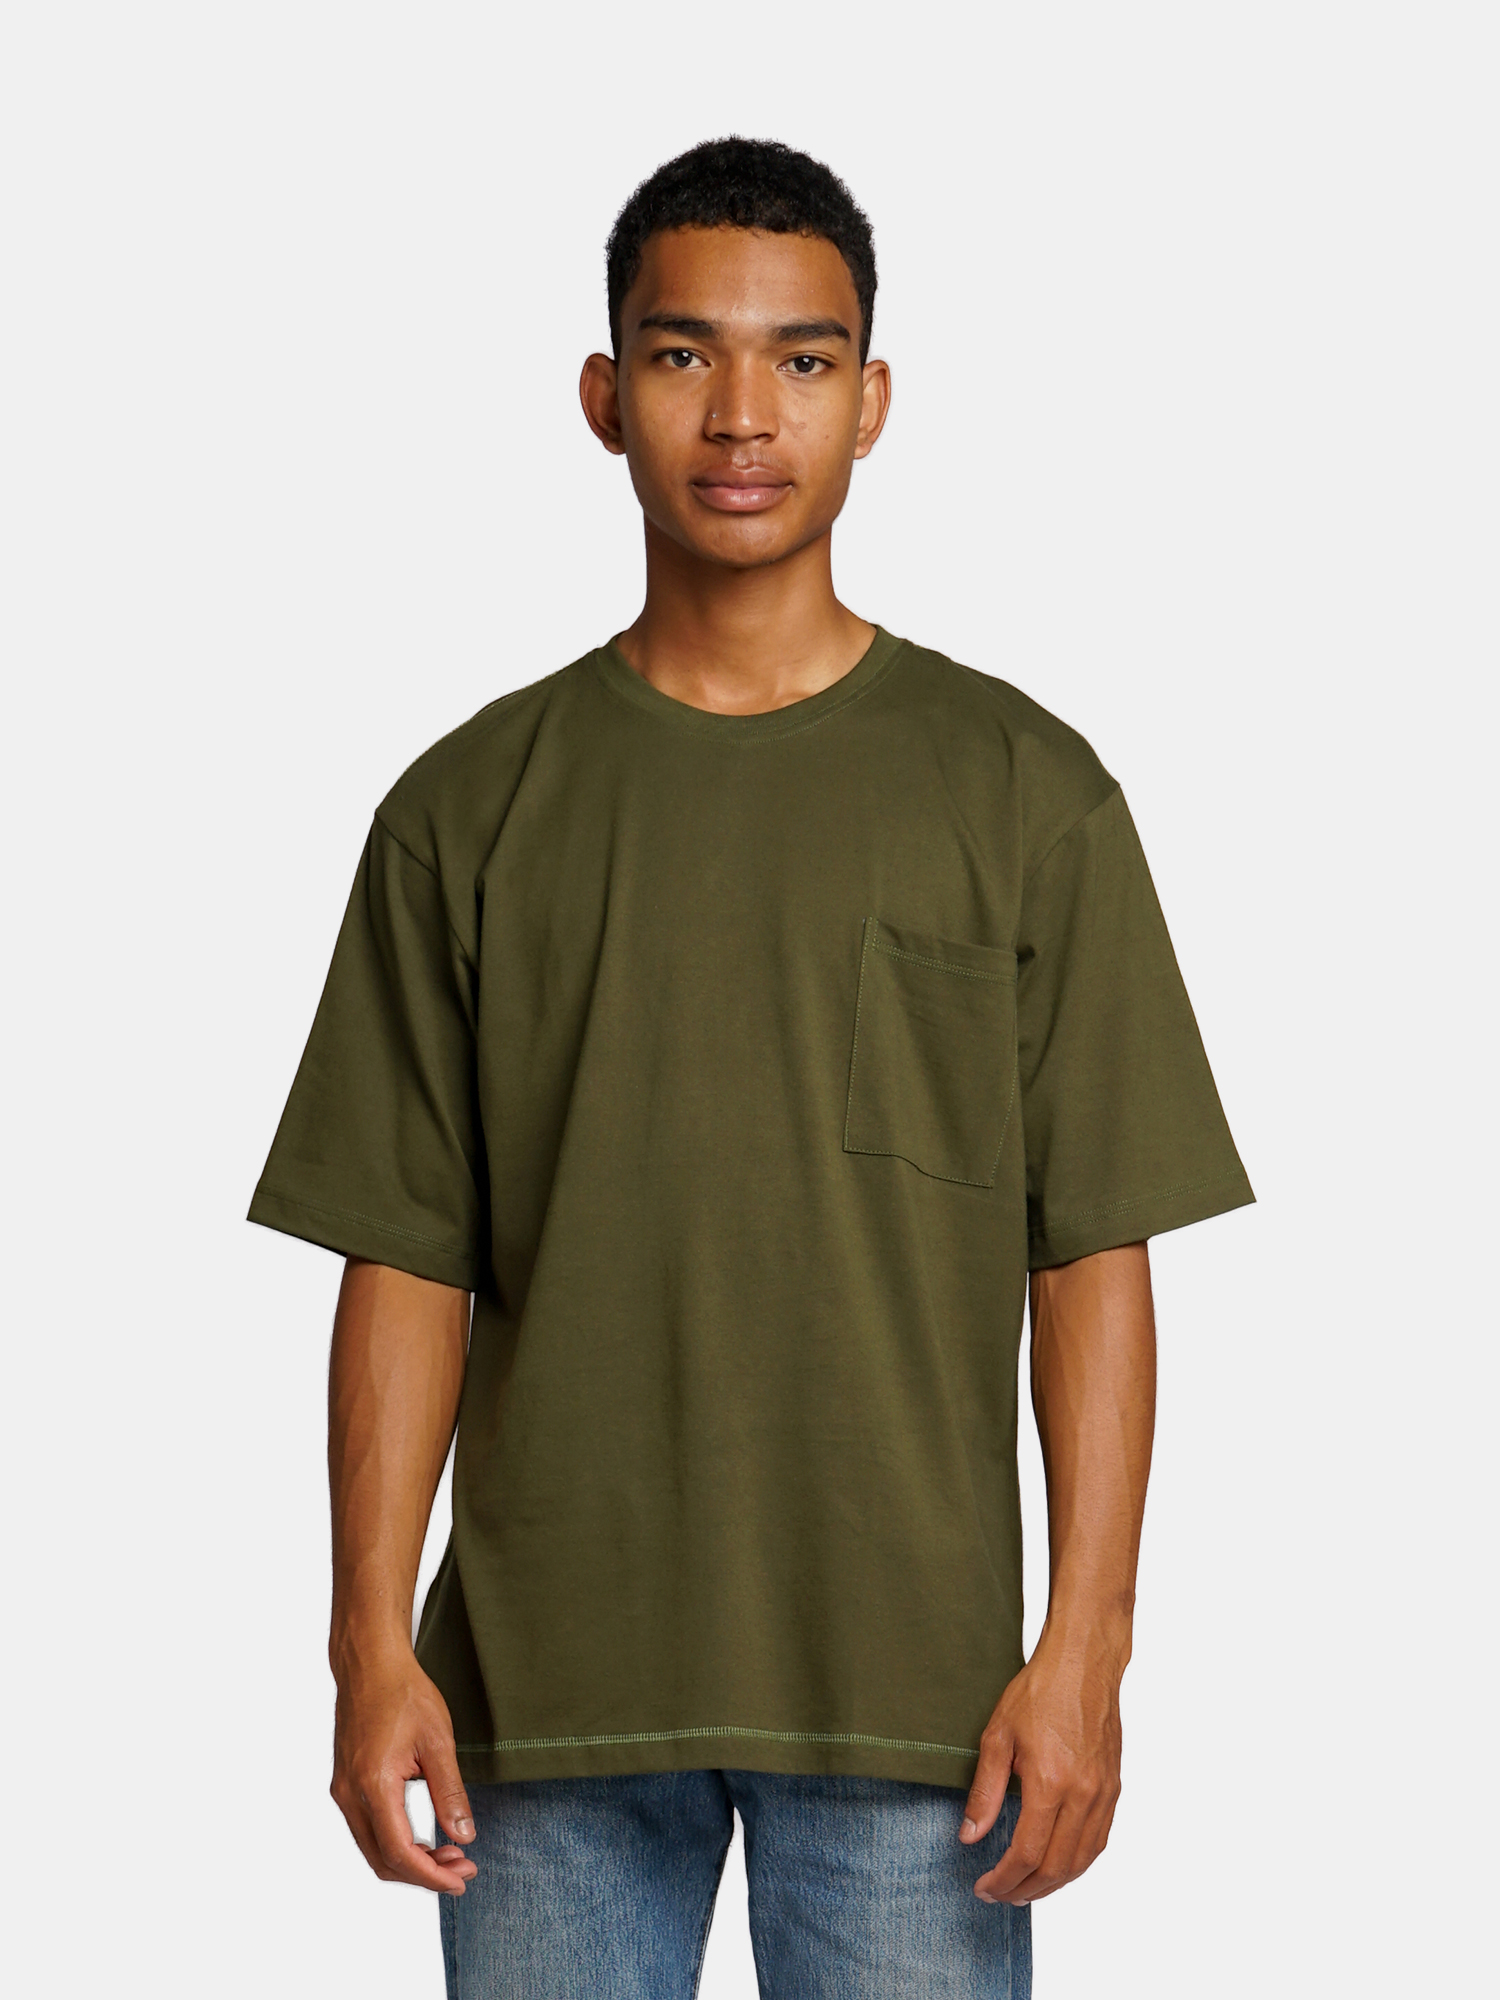 Oversize Pocket T-Shirt - Army Green | Urle Studio | Your Lifestyle ...